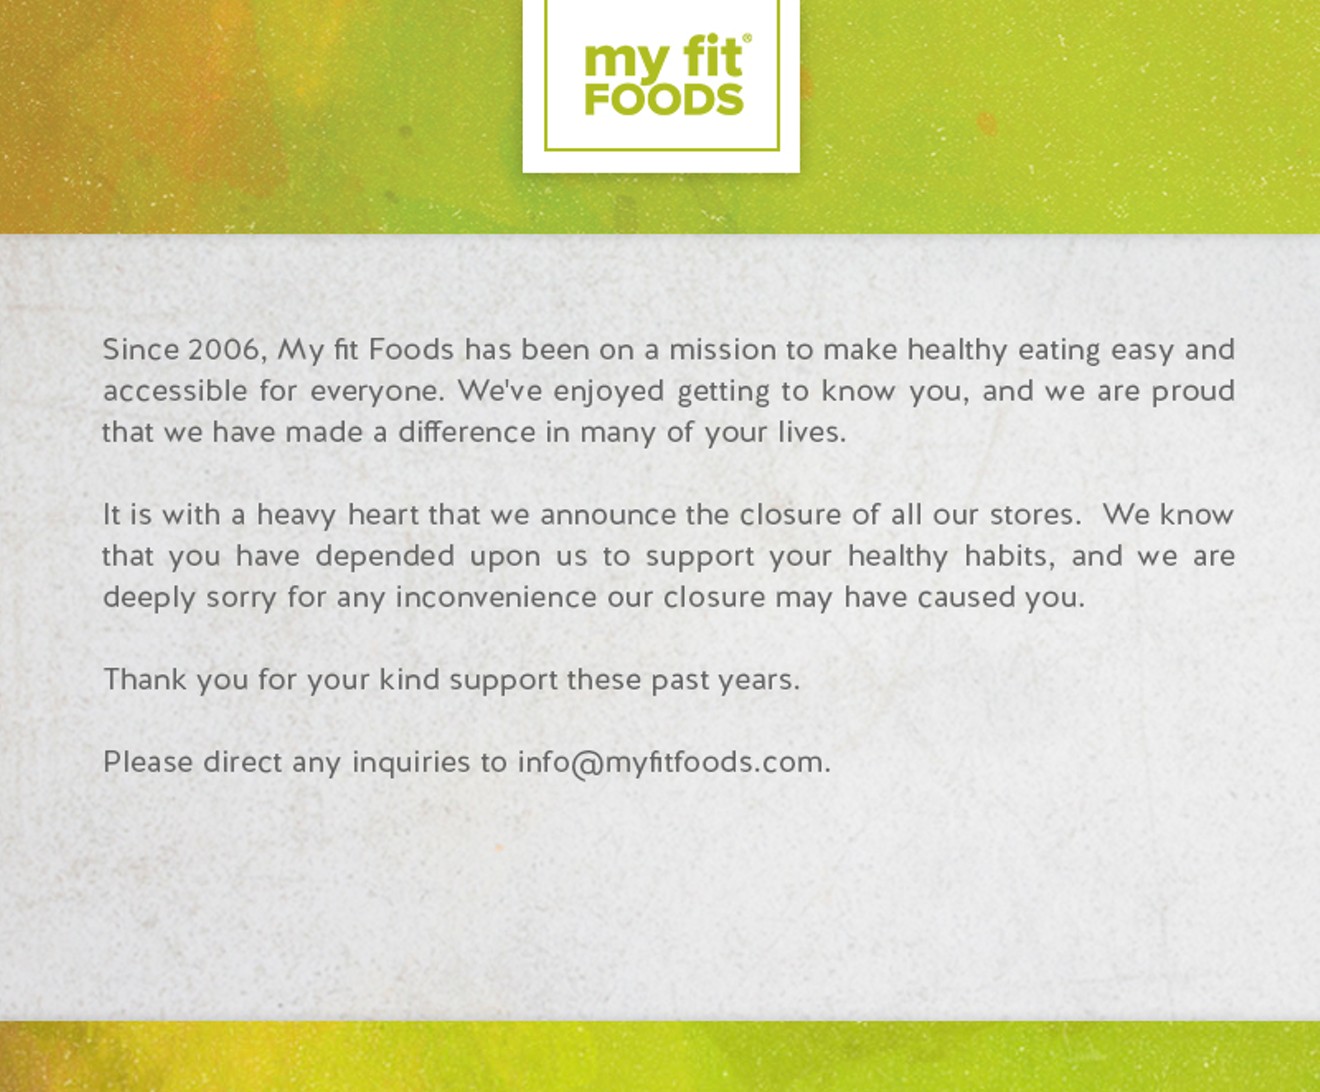 My Fit Foods shuttered abruptly this weekend, deleting all its social media and leaving nothing on their website save for this message to customers.